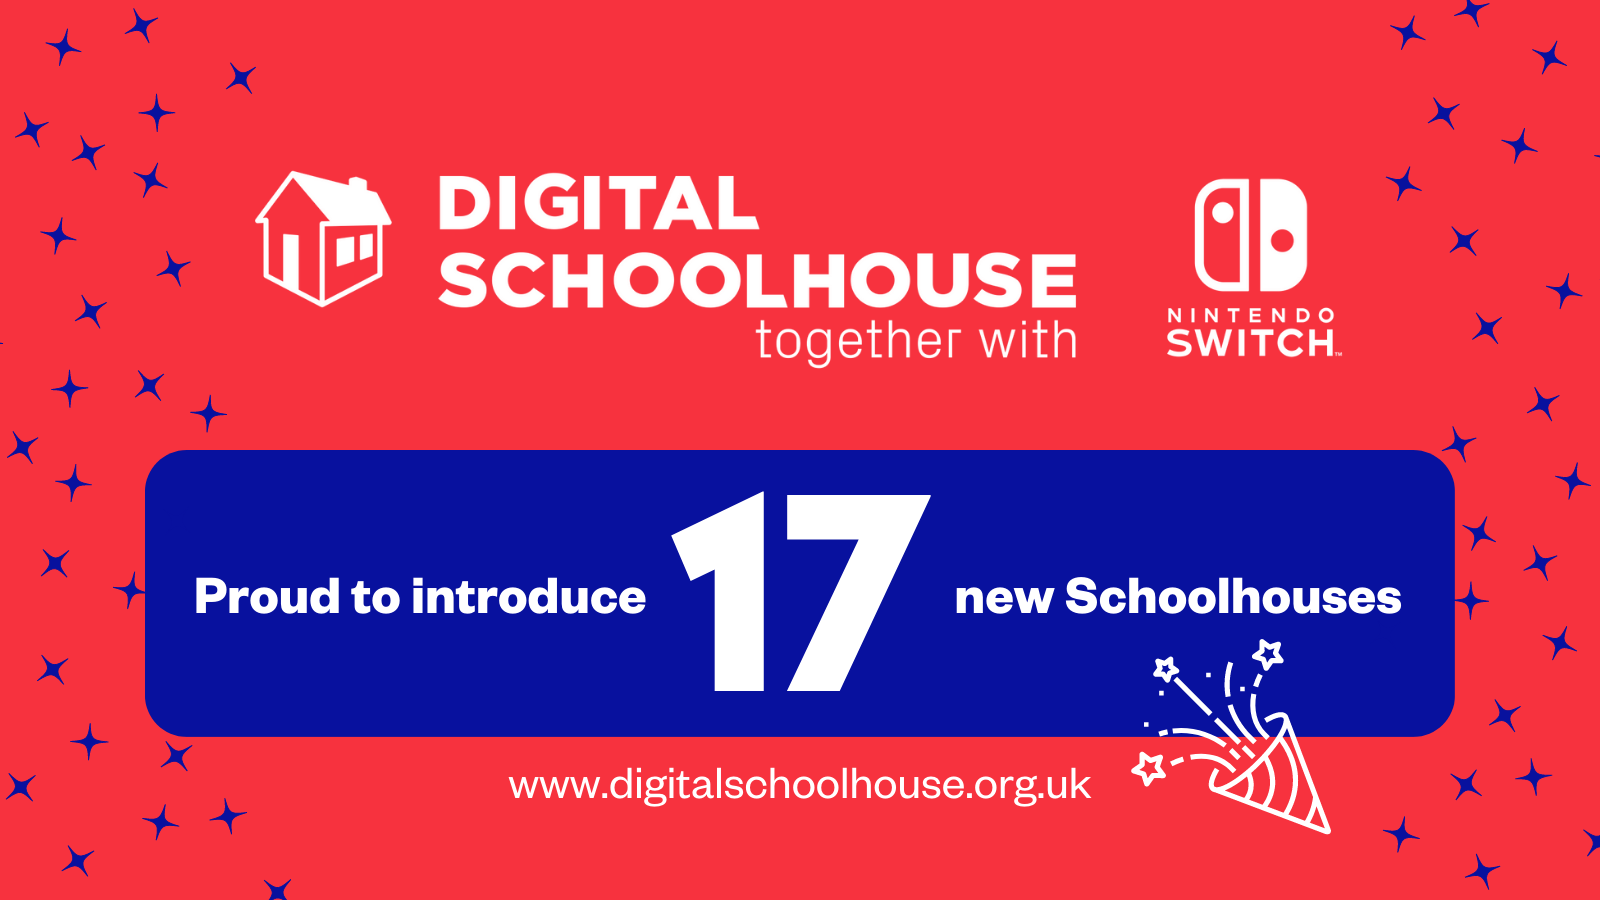 Our programme continues to grow with 17 new Schoolhouses joining us in September